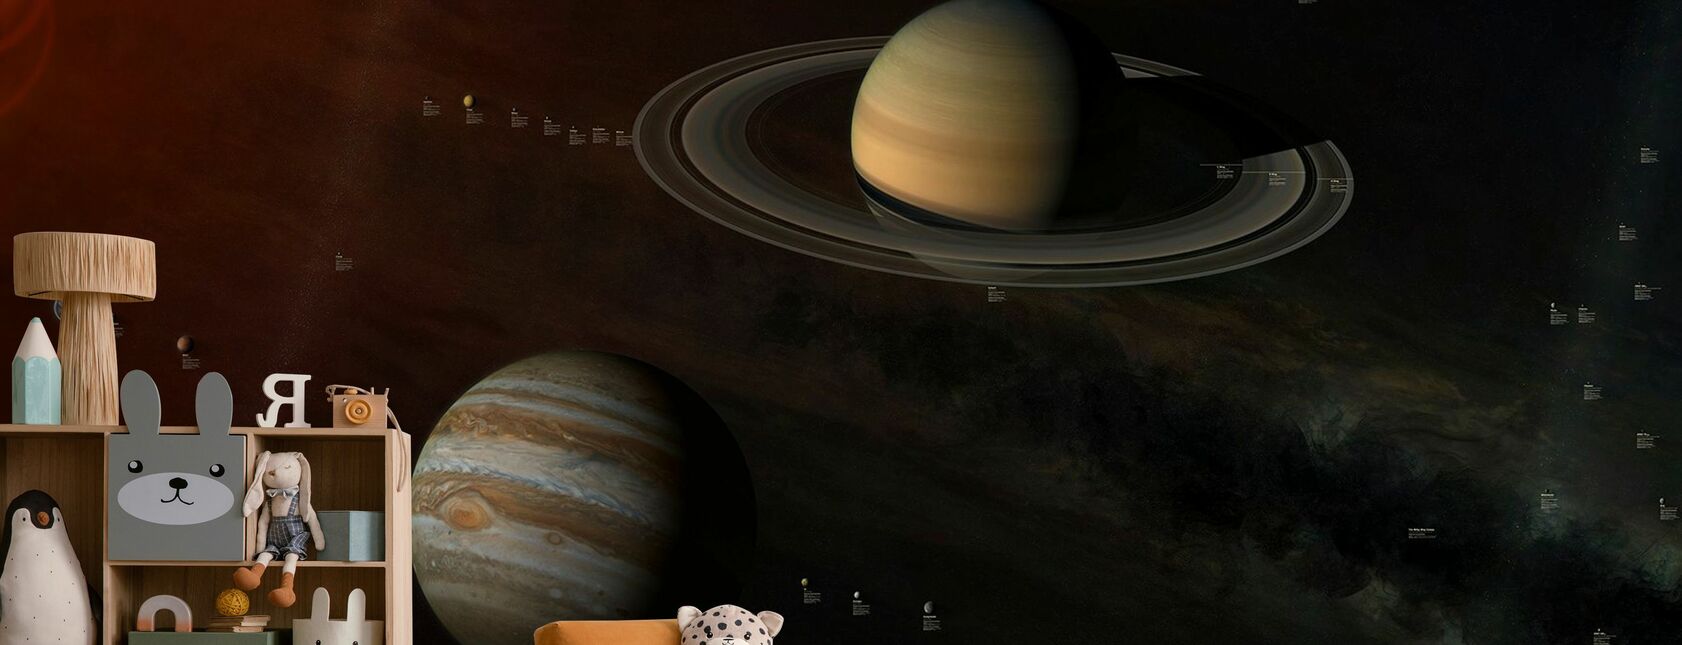 Solar System - With info labels - Wallpaper - Kids Room